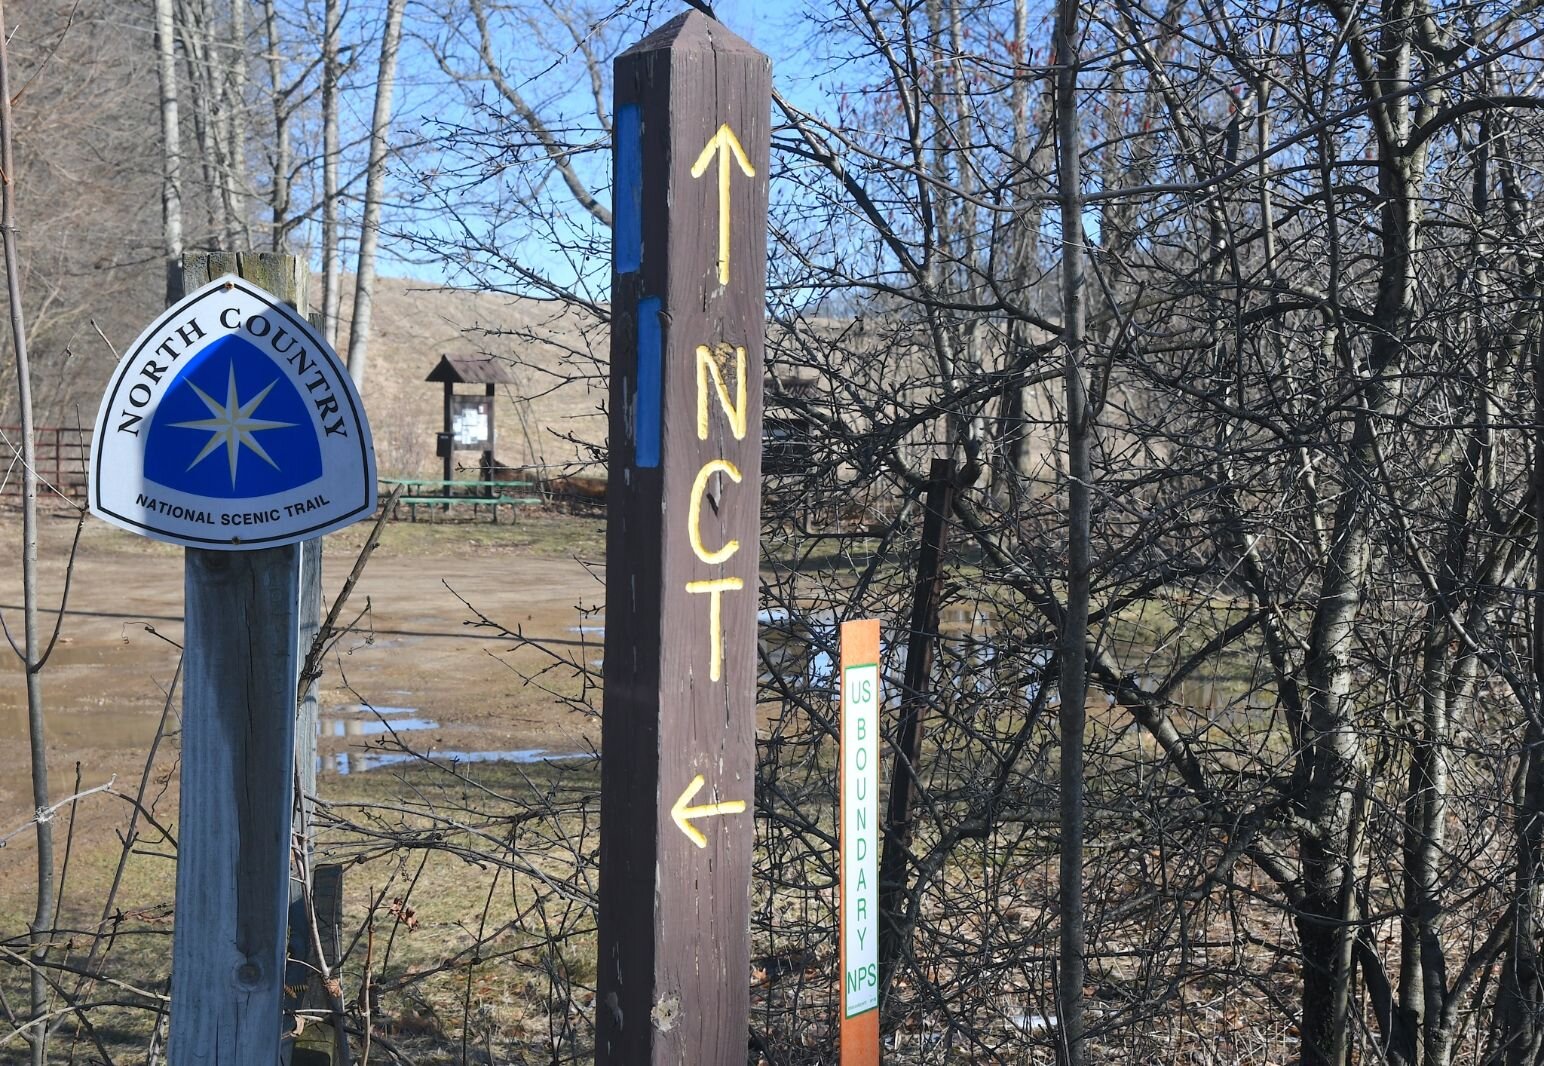 The trailhead for the Augusta Prairie portion of the North Country Trail.